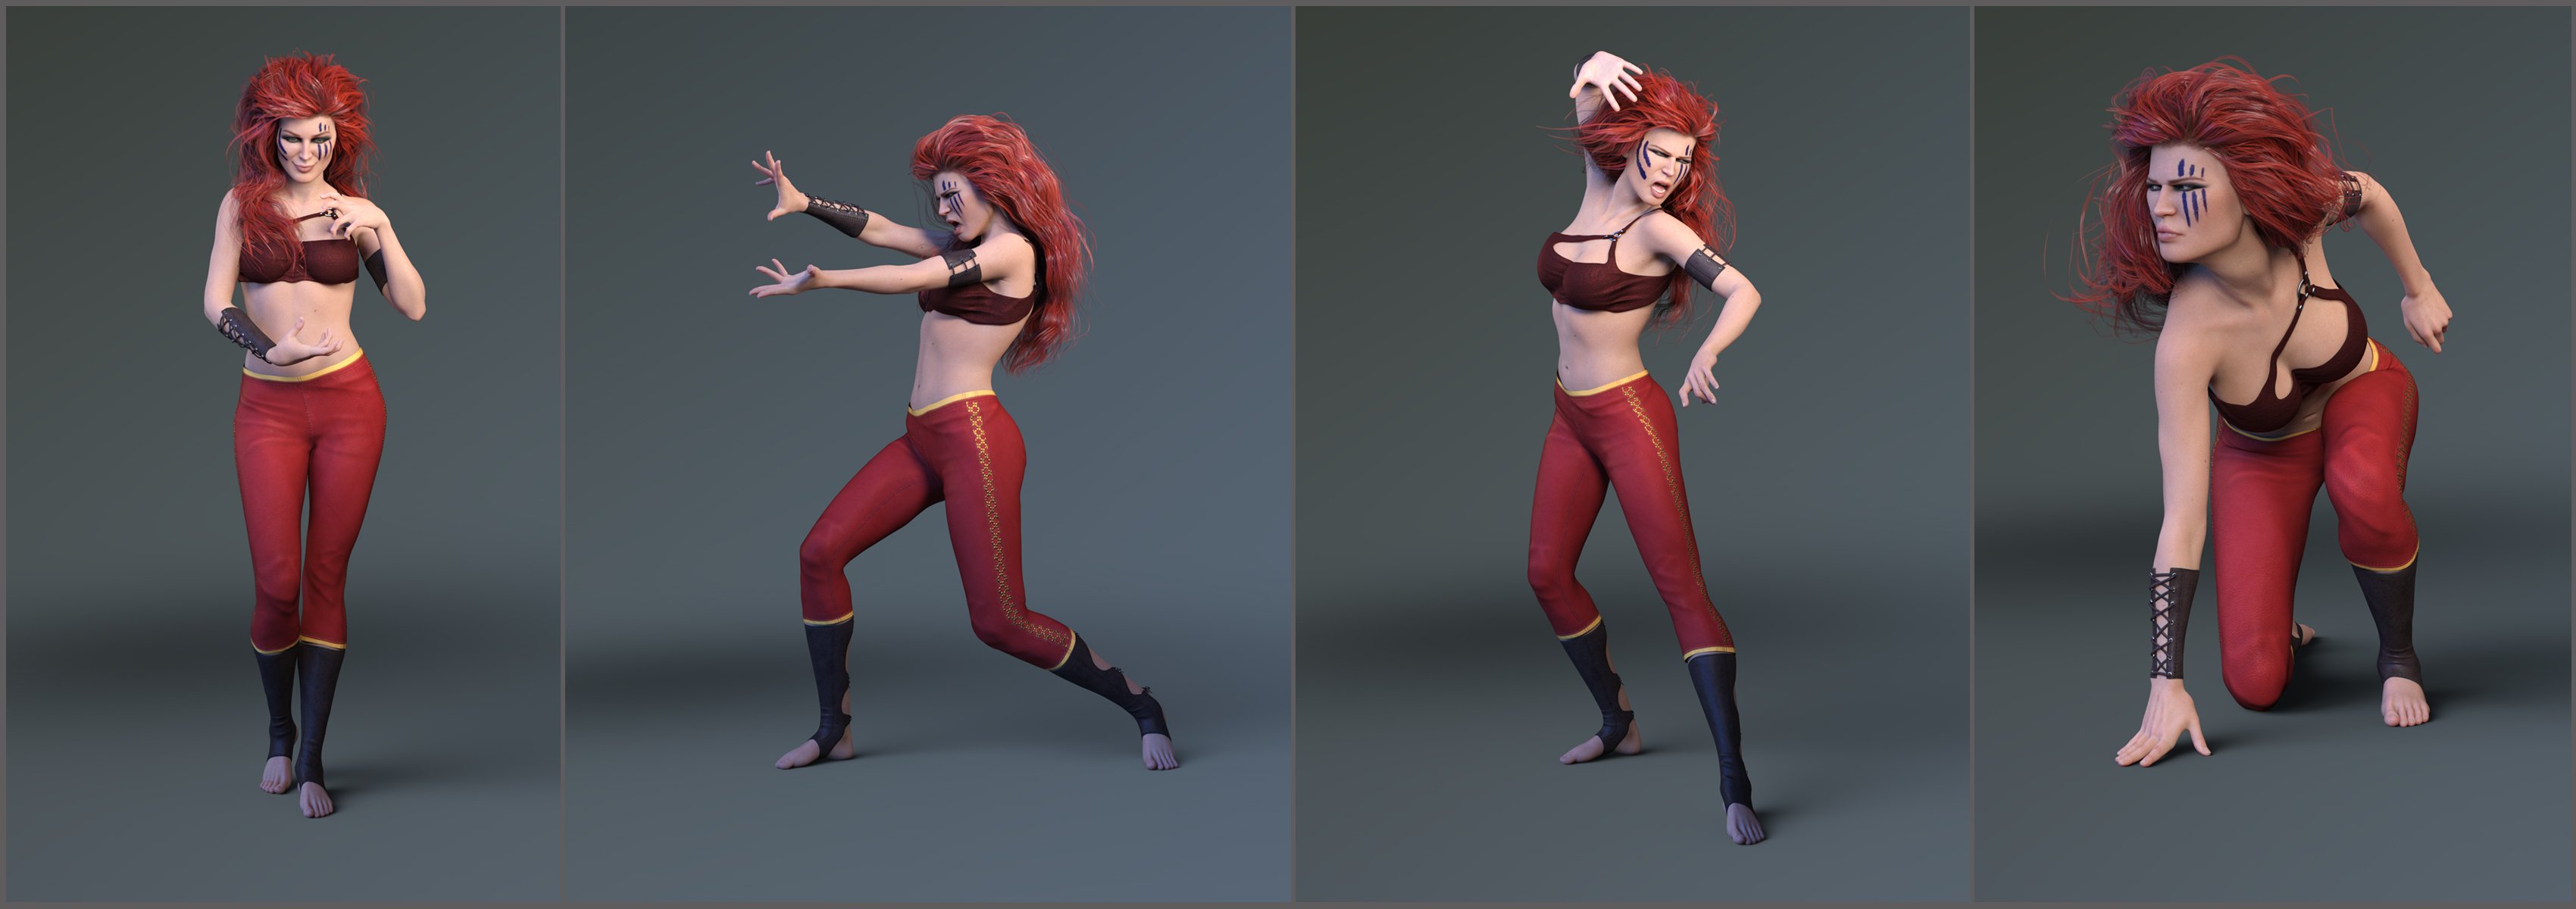 Z Magic Powers Poses and Expressions for Leisa 8 by: Zeddicuss, 3D Models by Daz 3D